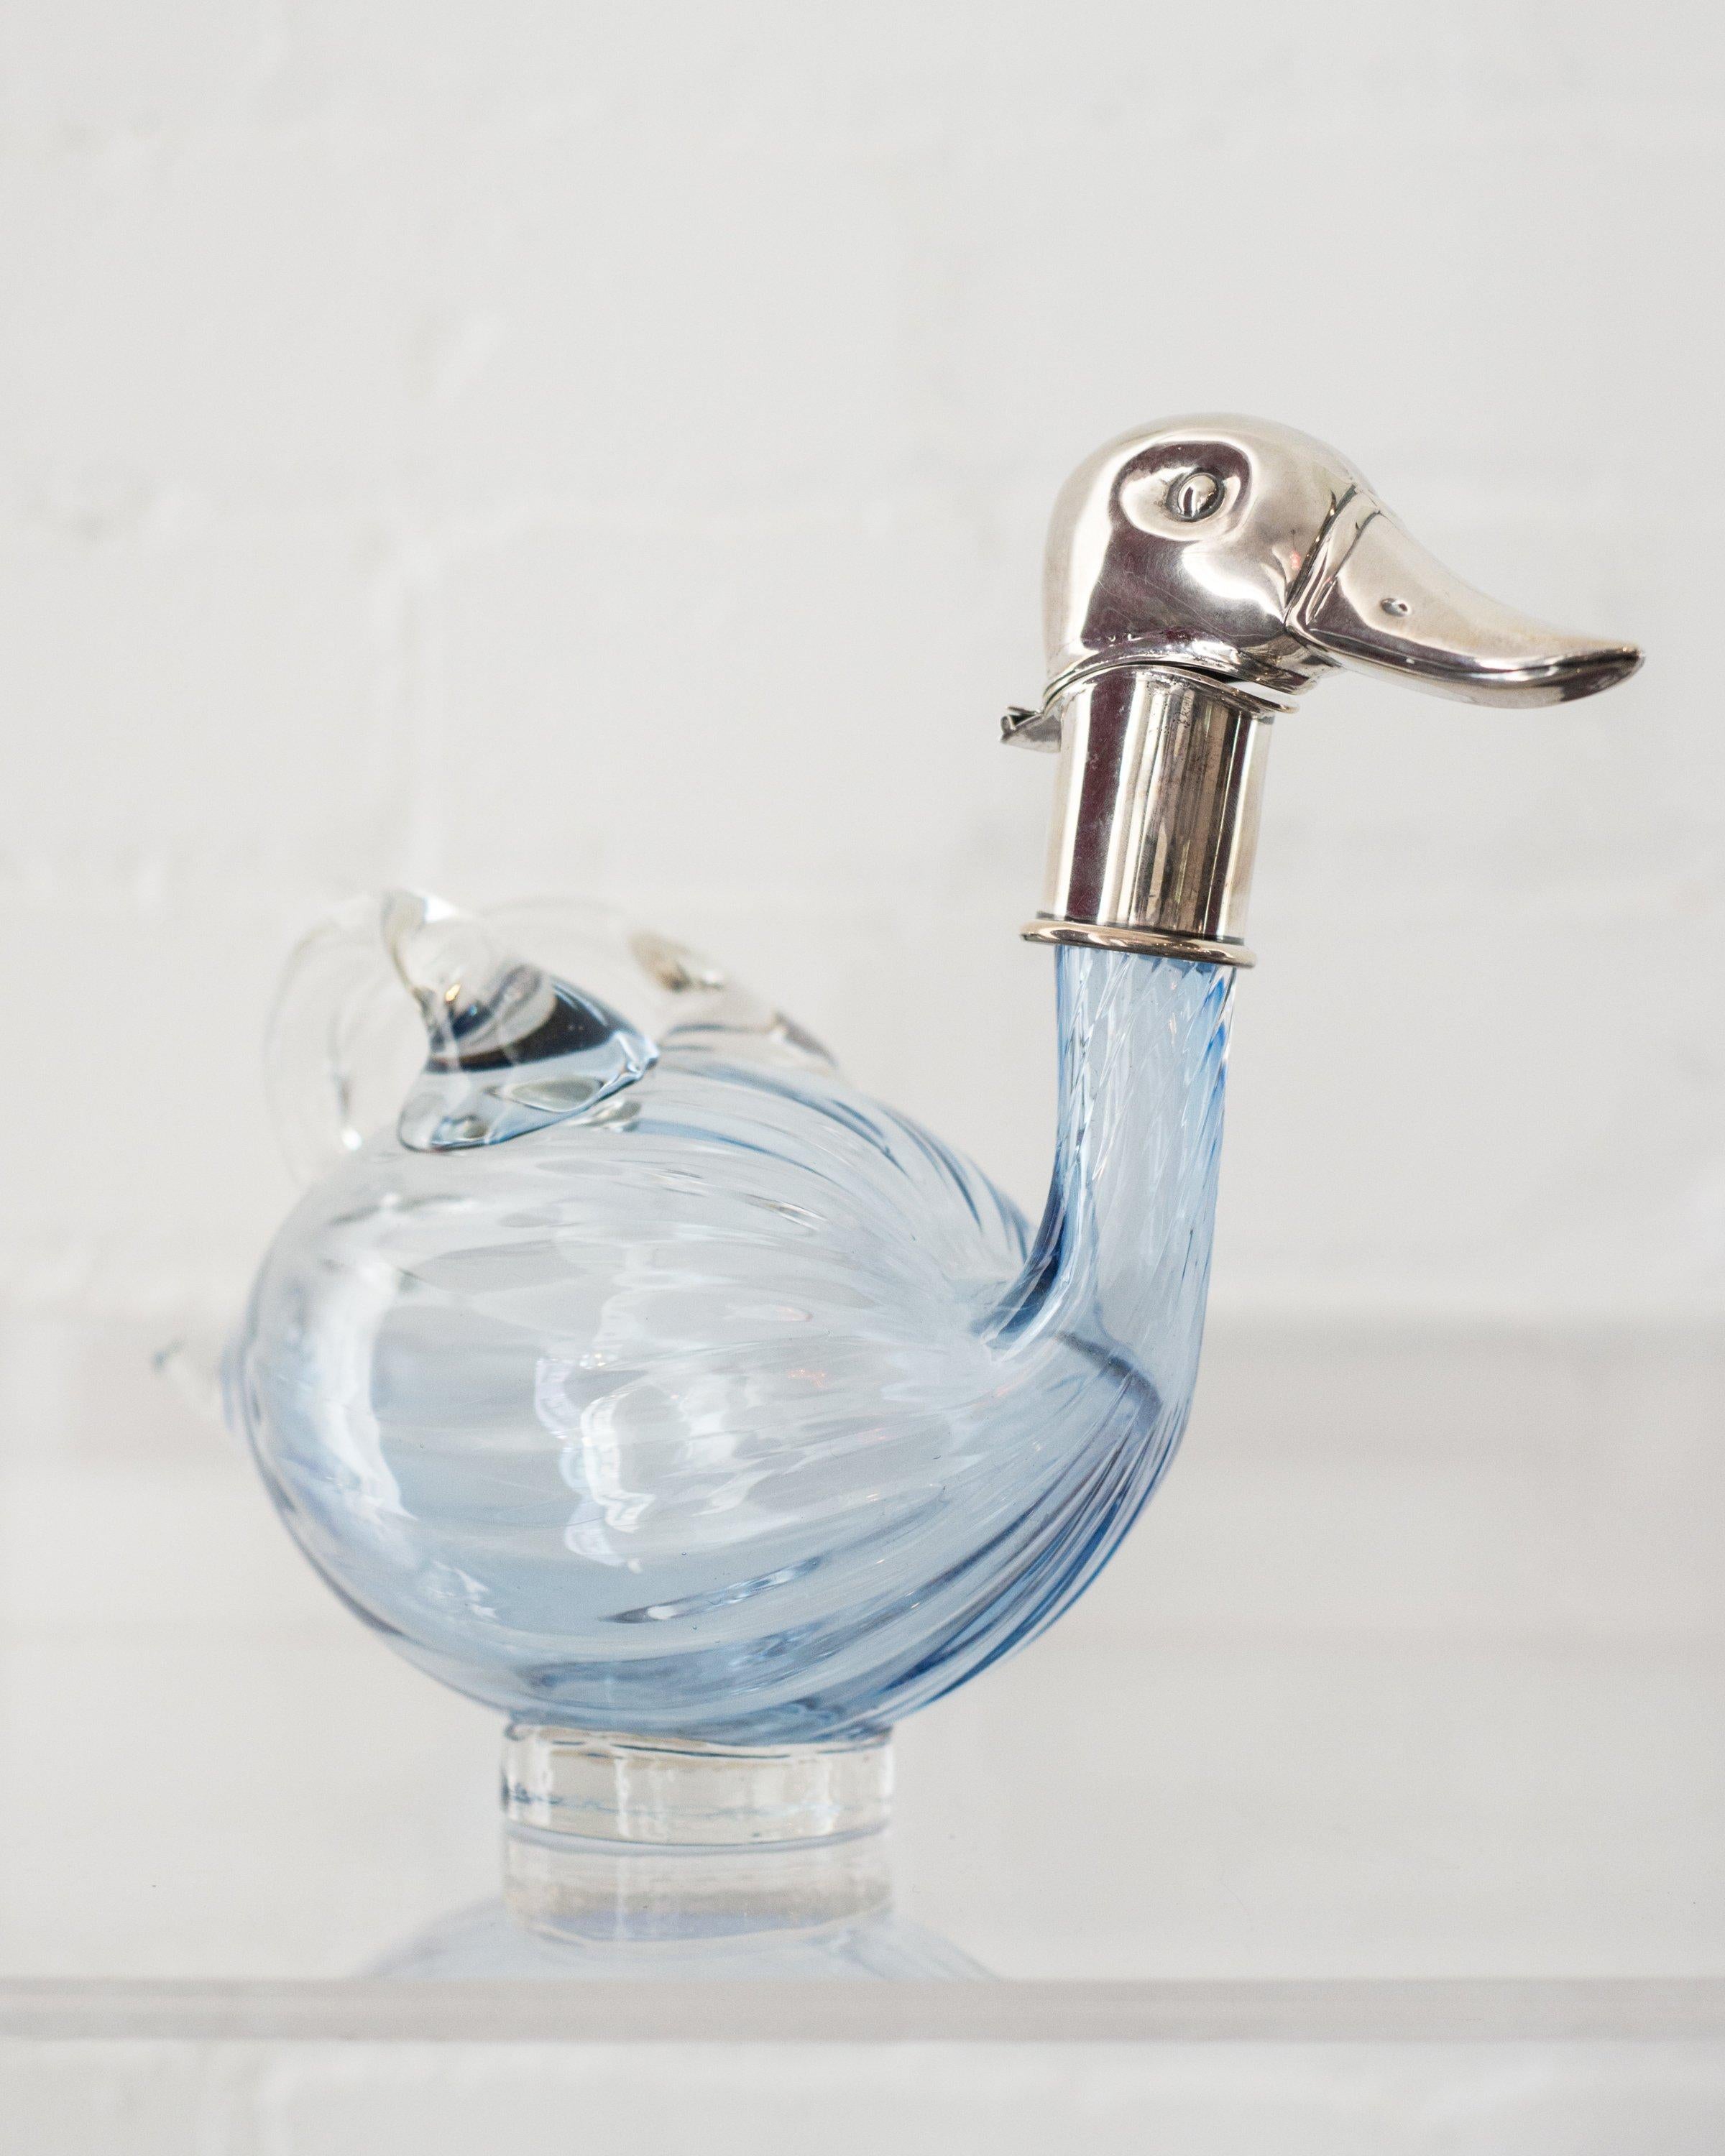 Start the night by pouring a glass of wine from this unusual Austrian sterling silver blue duck decanter. Sterling silver head is hinged at the neck to pour and fill. This conversation piece will enhance any evening with friends.